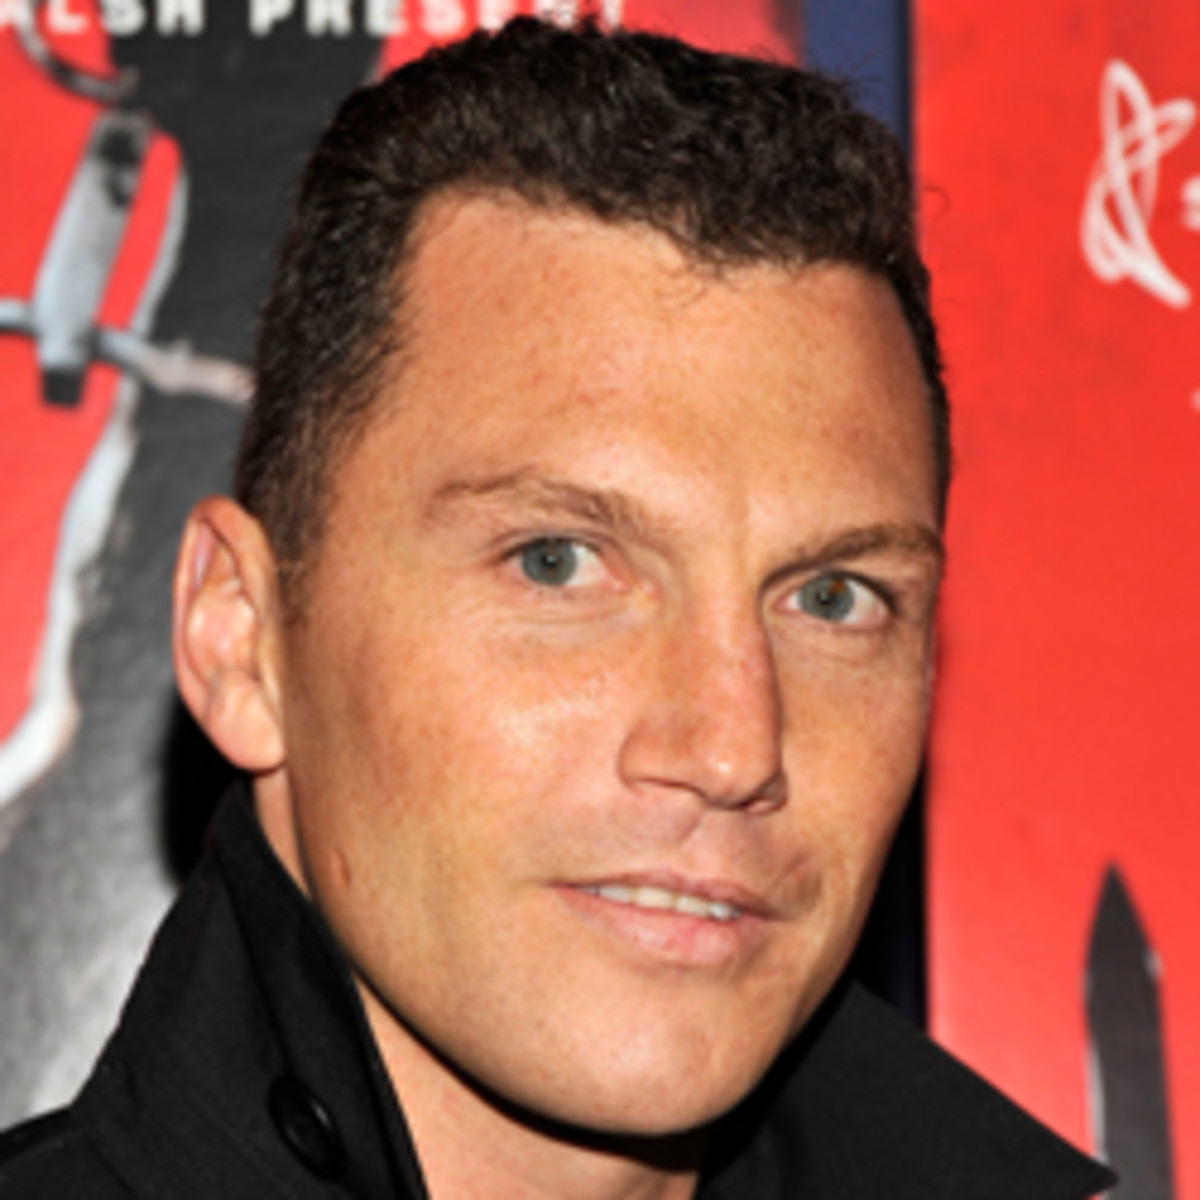 Sean Avery was one of the NHL's most notorious instigators in his 14-year career. (Stephen Lovekin/Getty Images)